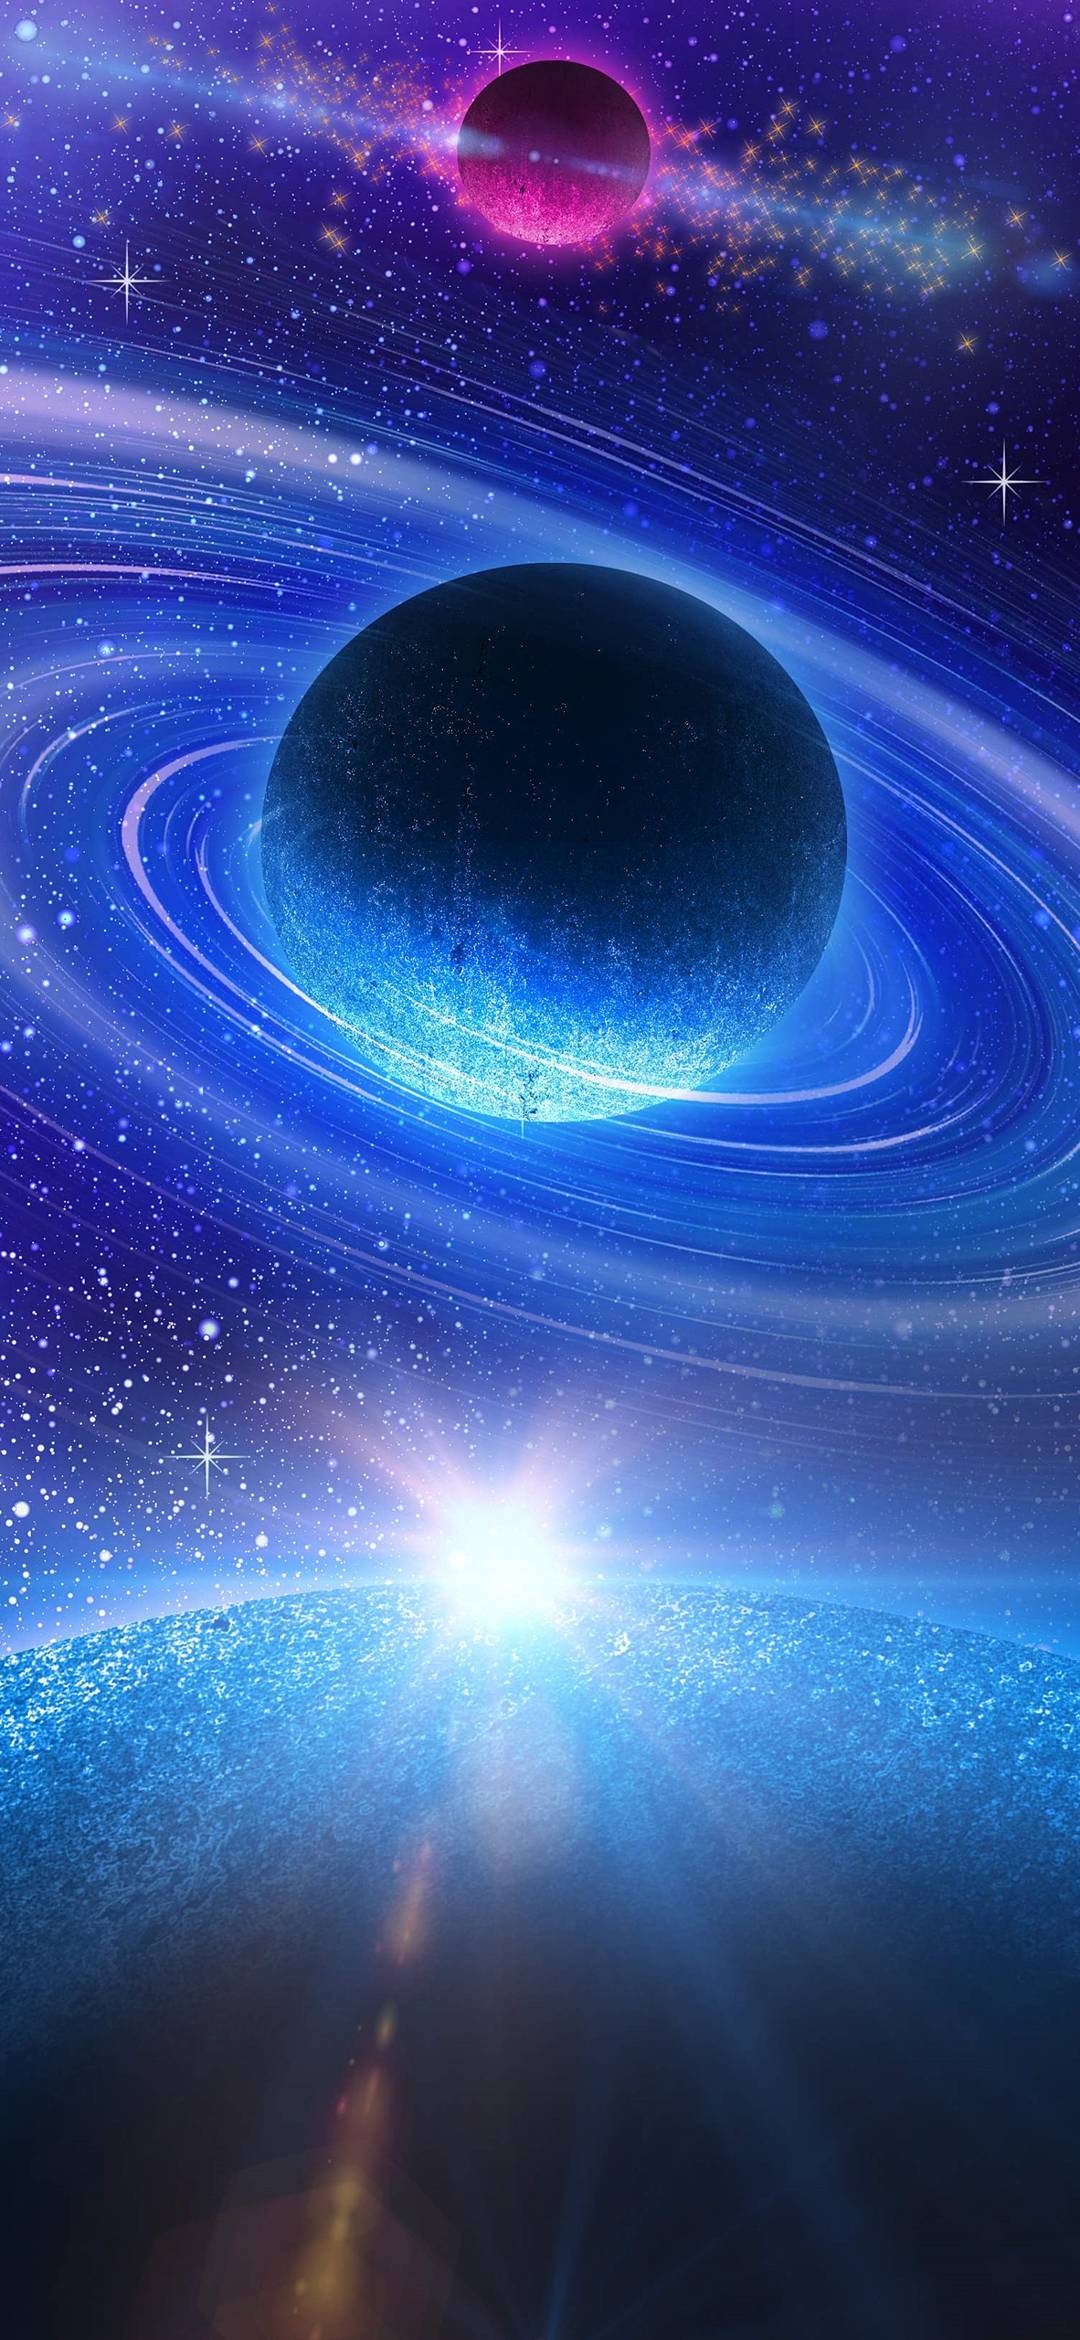 Space Wallpaper for Phone- 194